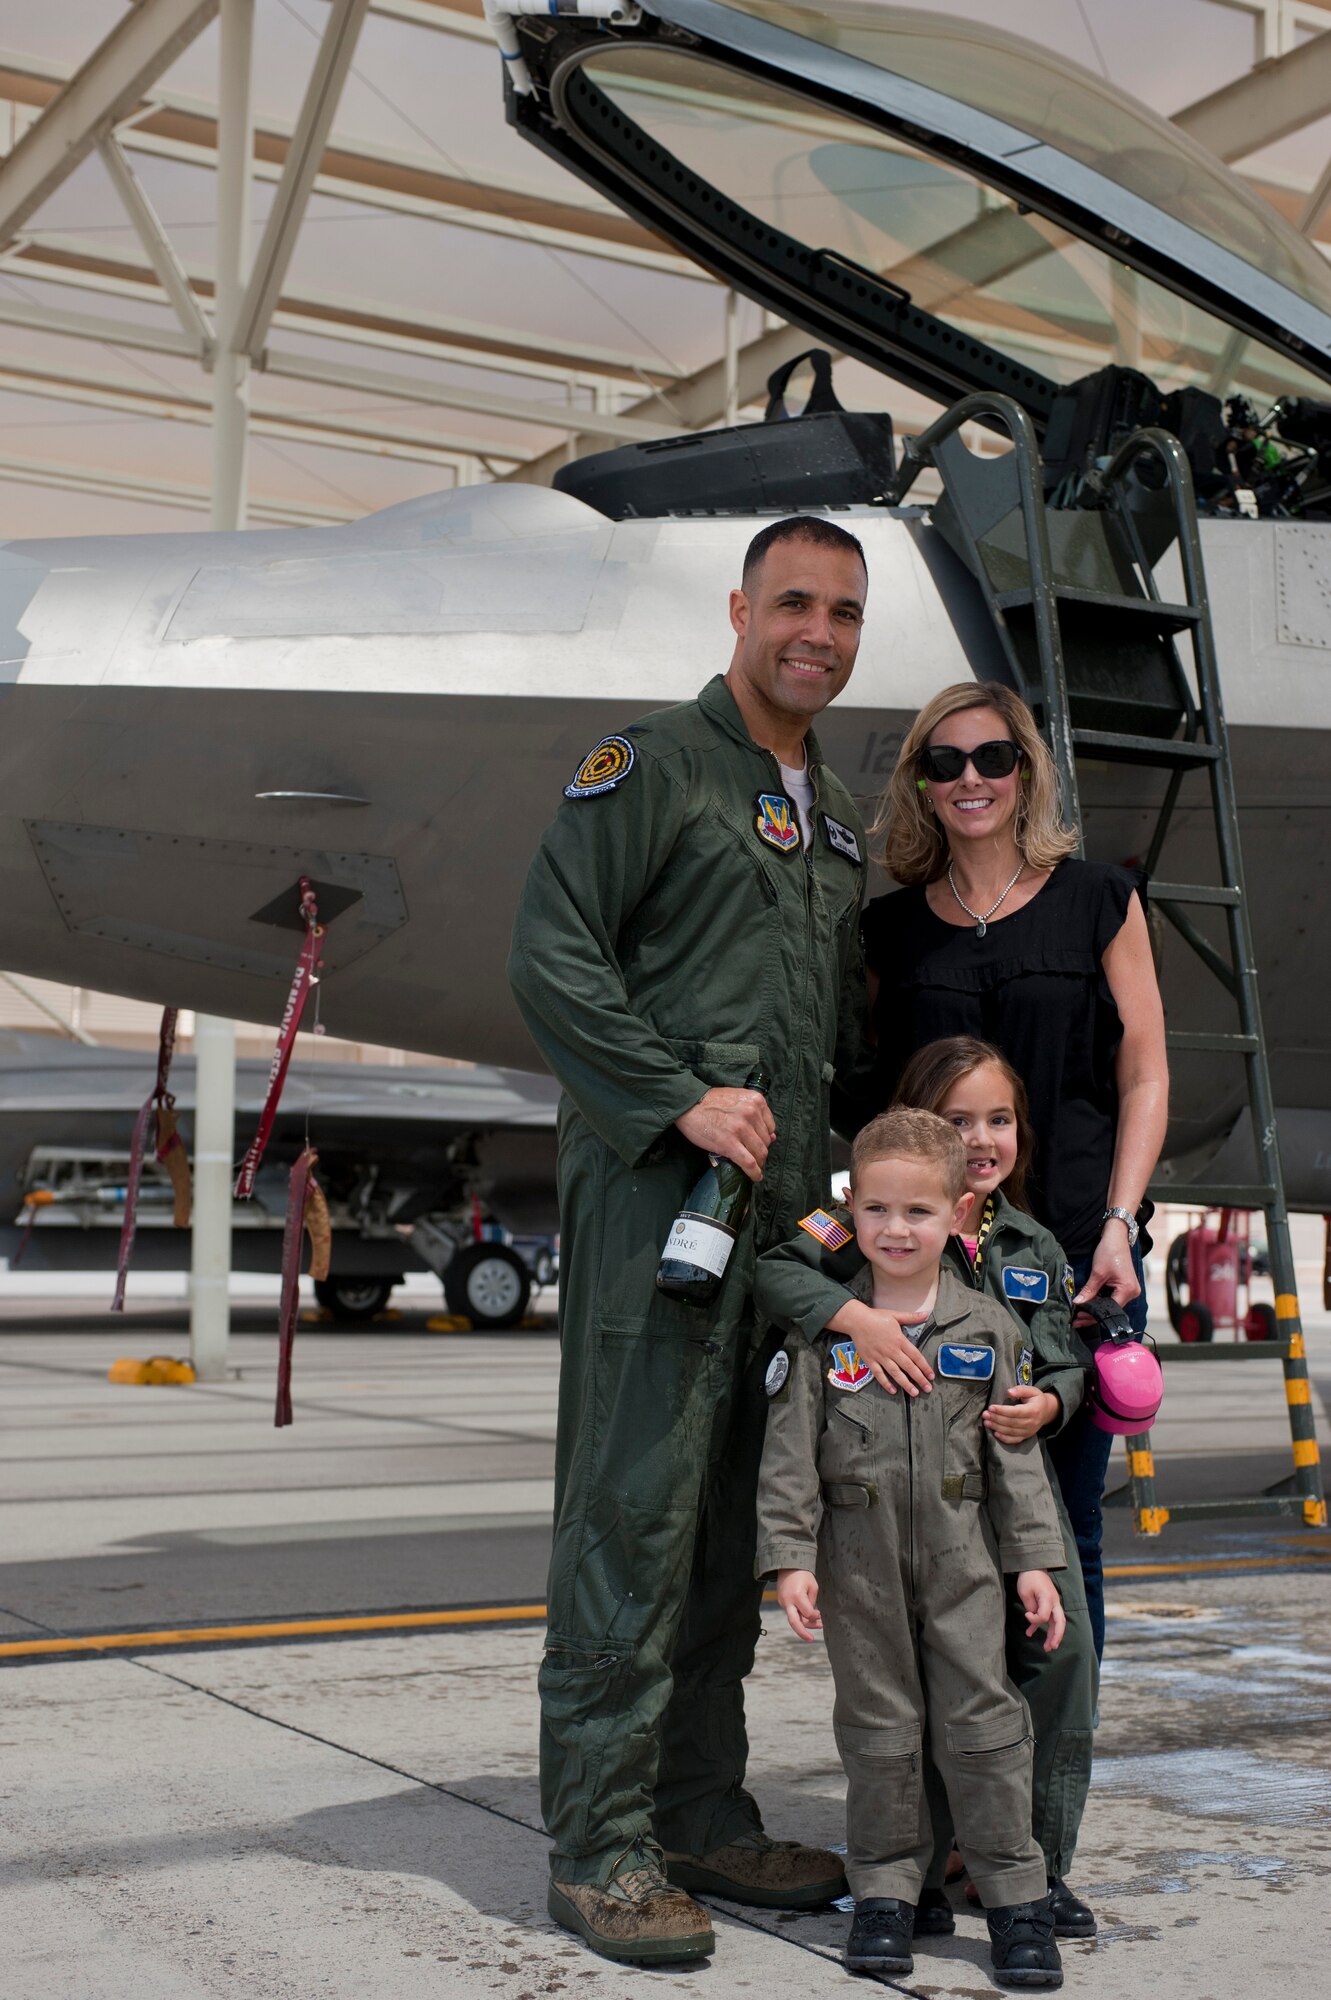 Col. Adrian Spain, U.S. Air Force Weapons School commandant, poses for a picture with his family after his final flight as the USAFWS commandant at Nellis Air Force Base, Nev., May 11, 2015. Spain’s final flight commemorated his time at Nellis AFB. (U.S. Air Force photo by Airman 1st Class Mikaley Towle)